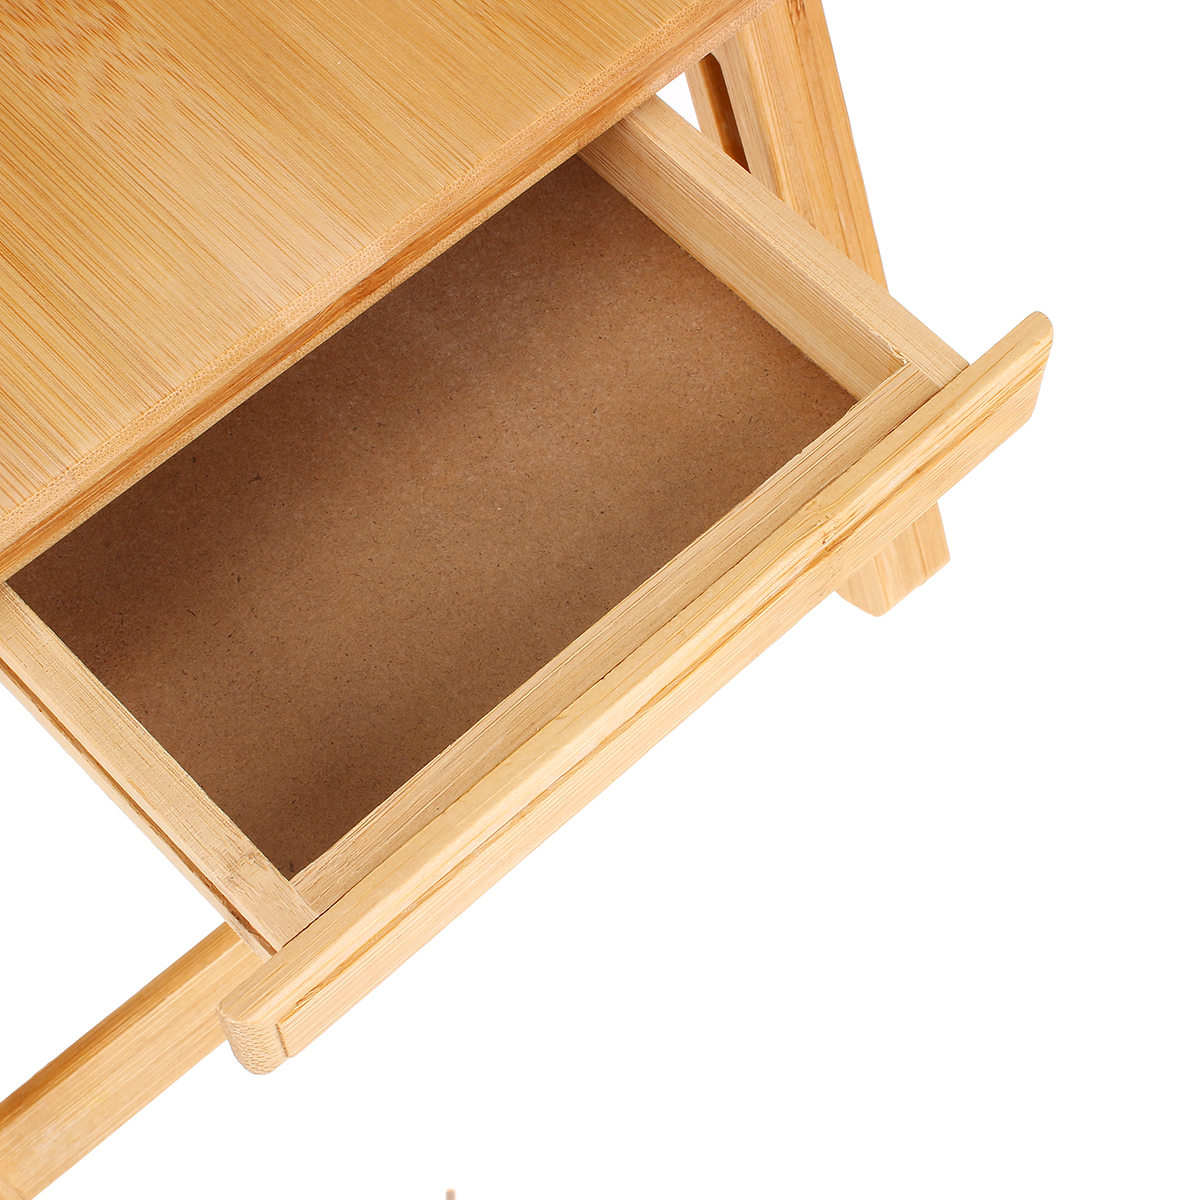 Bamboo-Laptop-Notebook-Bed-Desk-Table-Holder-Sofa-Tray-Cooling-Stand-With-Drawer-1805025-10